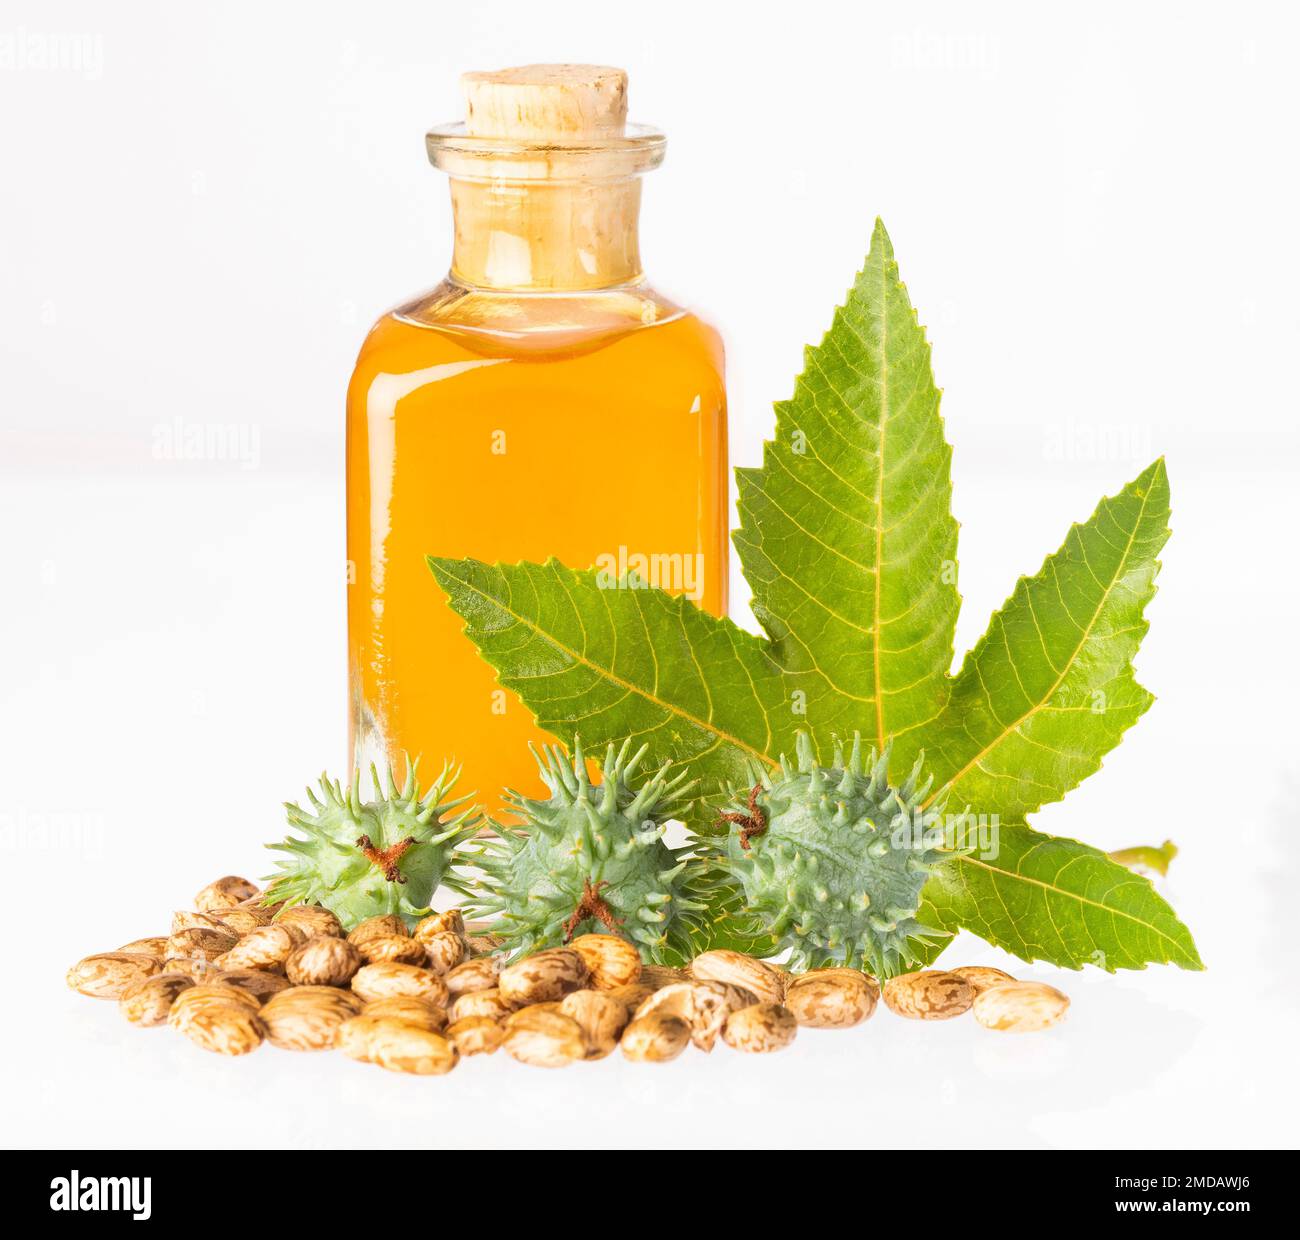 Ricinus communis seeds and hair oil - Natural product Stock Photo